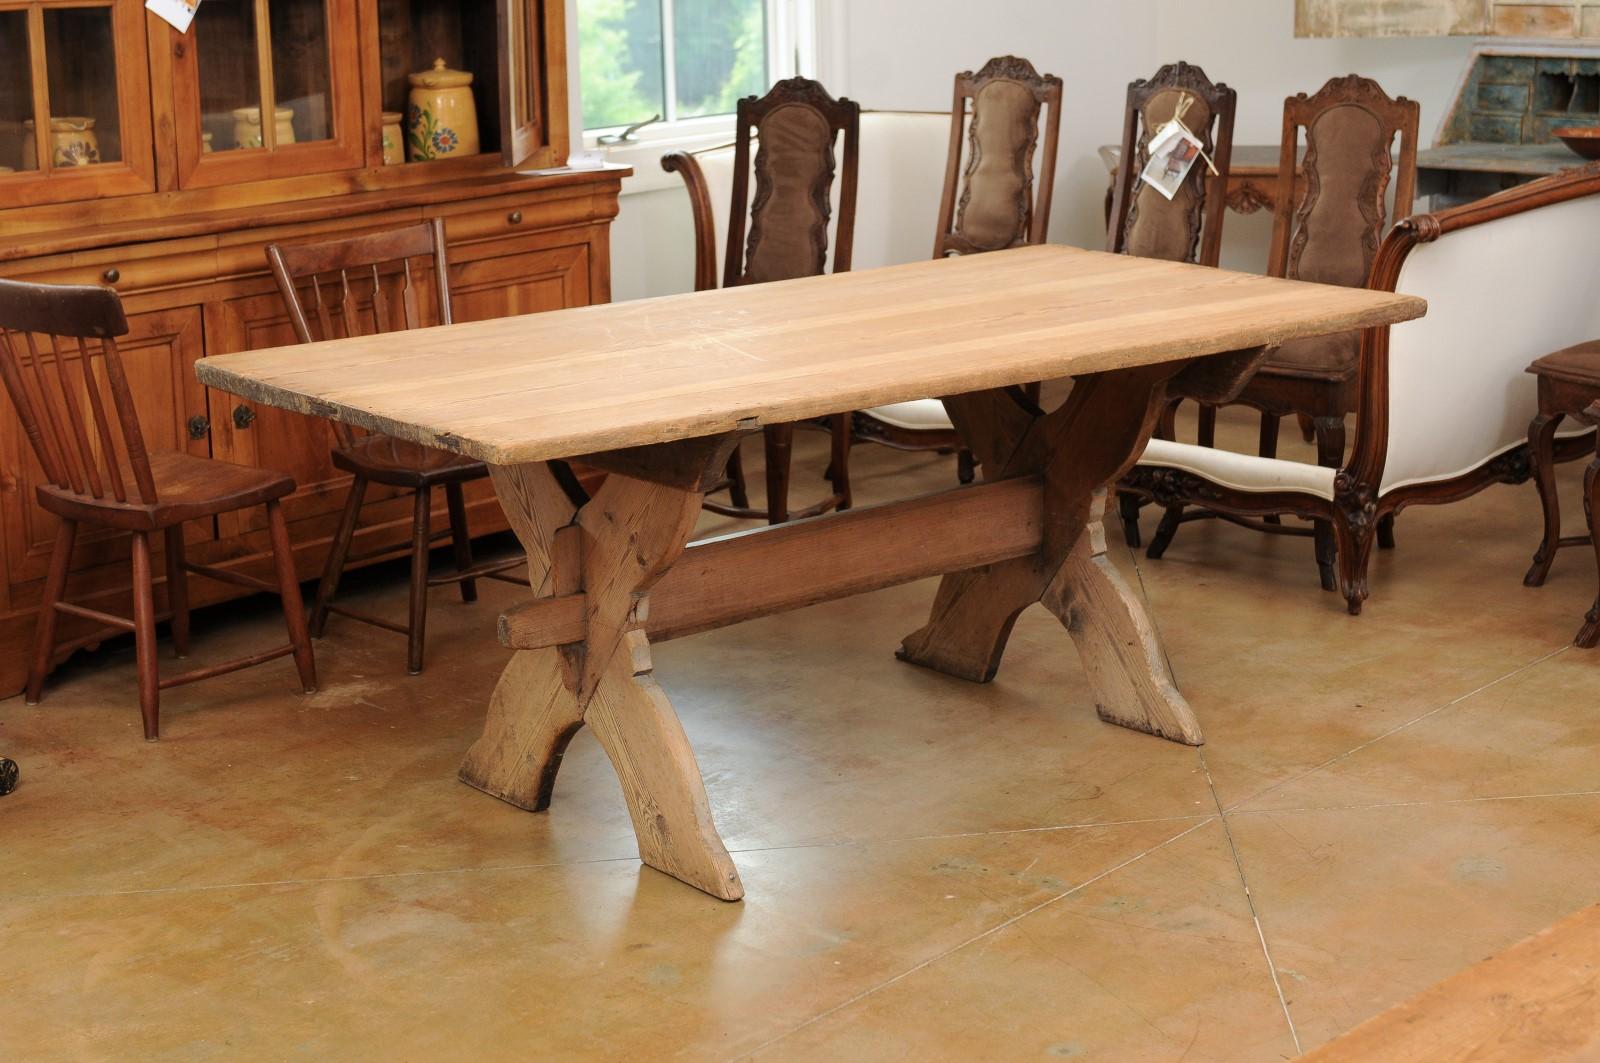 A Swedish sawbuck trestle farm table from the mid 18th century, with X-Form base, natural finish and nice patina. Created in Sweden during the third quarter of the 18th century, this farm table features a rectangular top sitting above a double